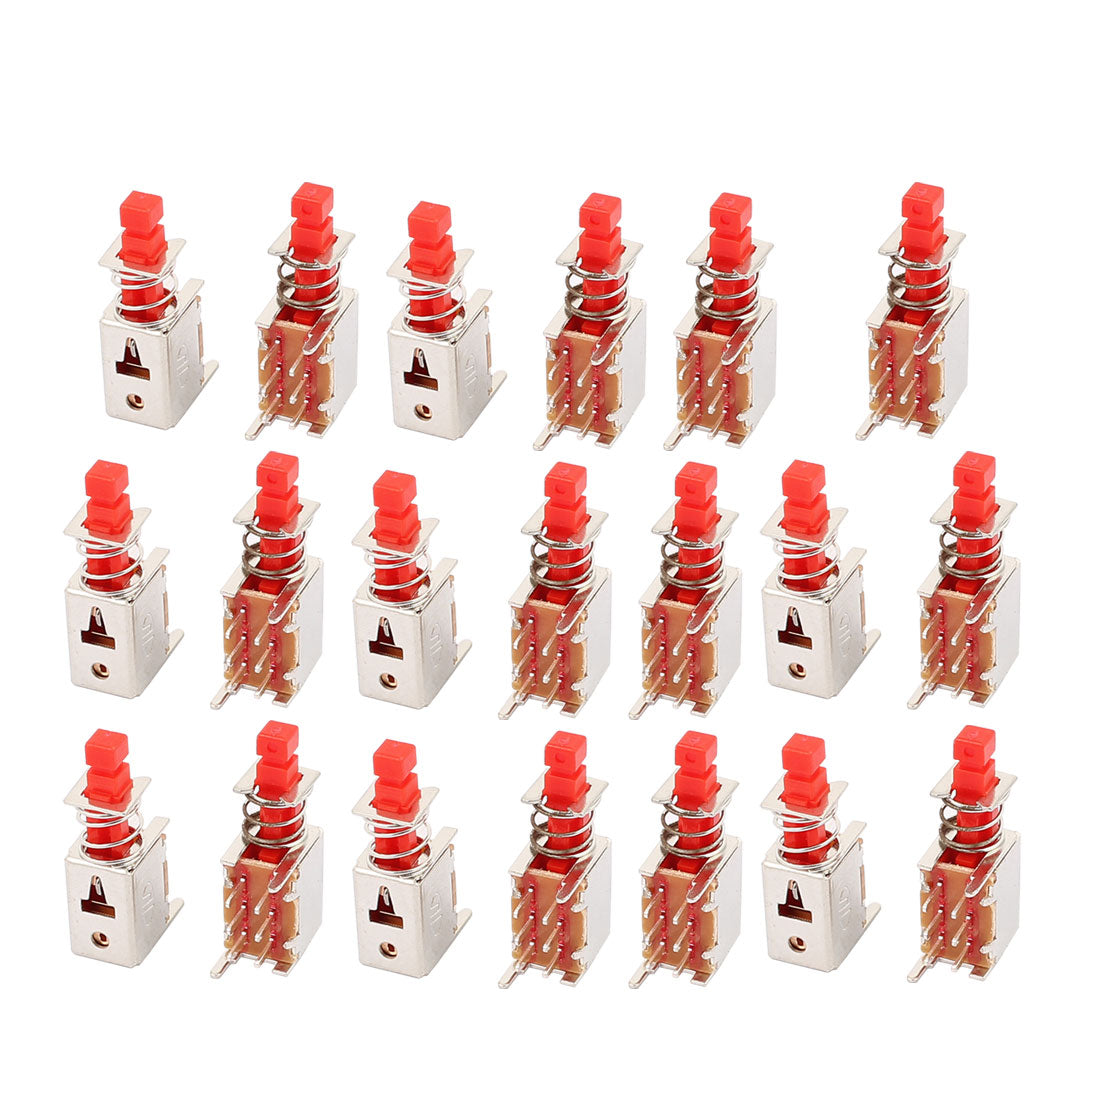 uxcell Uxcell 20Pcs 6 Pin 2mm Pitch Self-Locking DPDT Mini Micro Push Button Switch